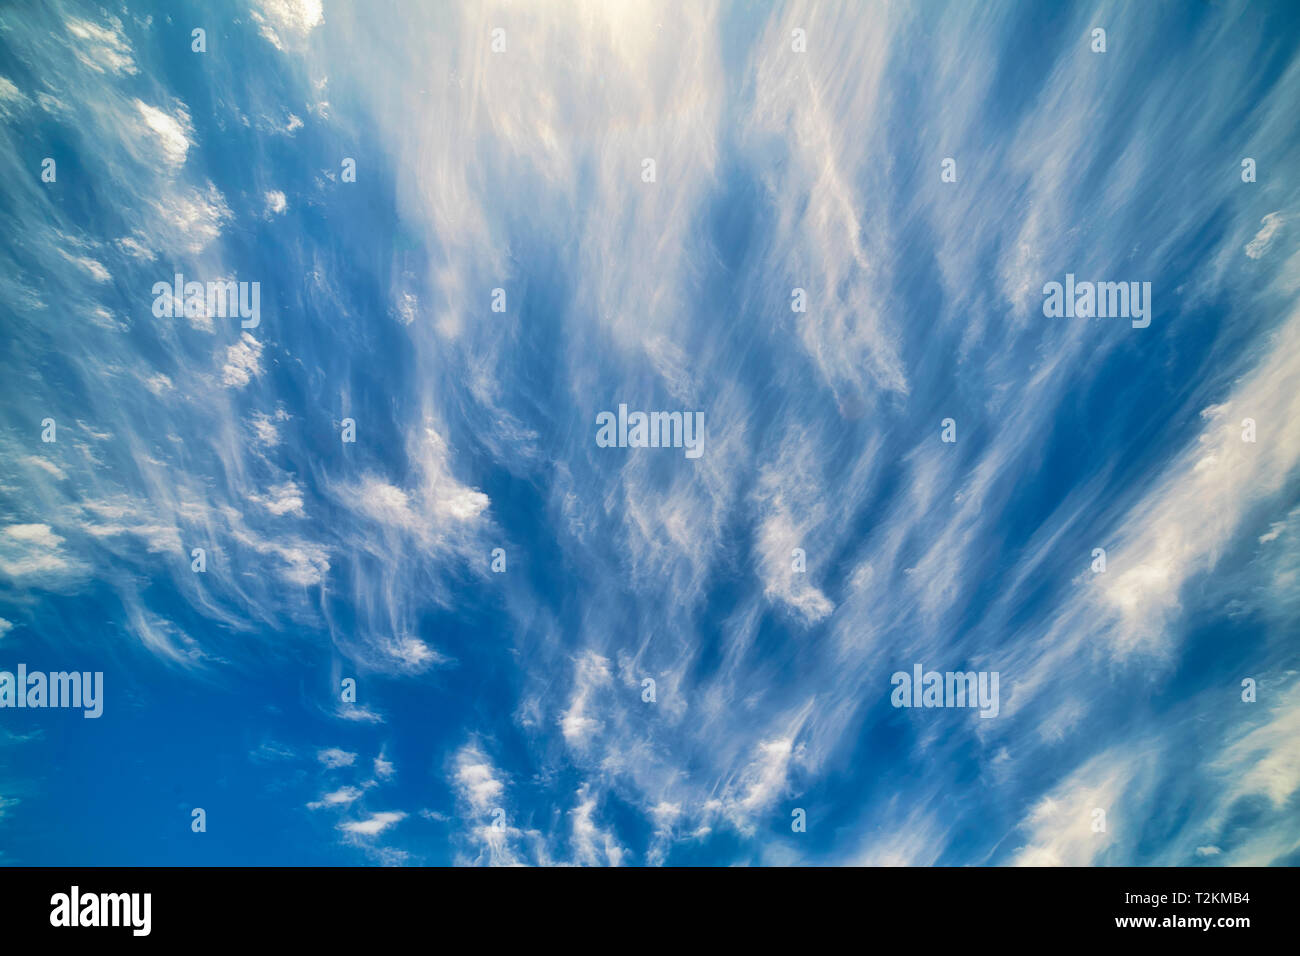 The combination of sun, blue sky, and wispy clouds make for interesting patterns. Stock Photo